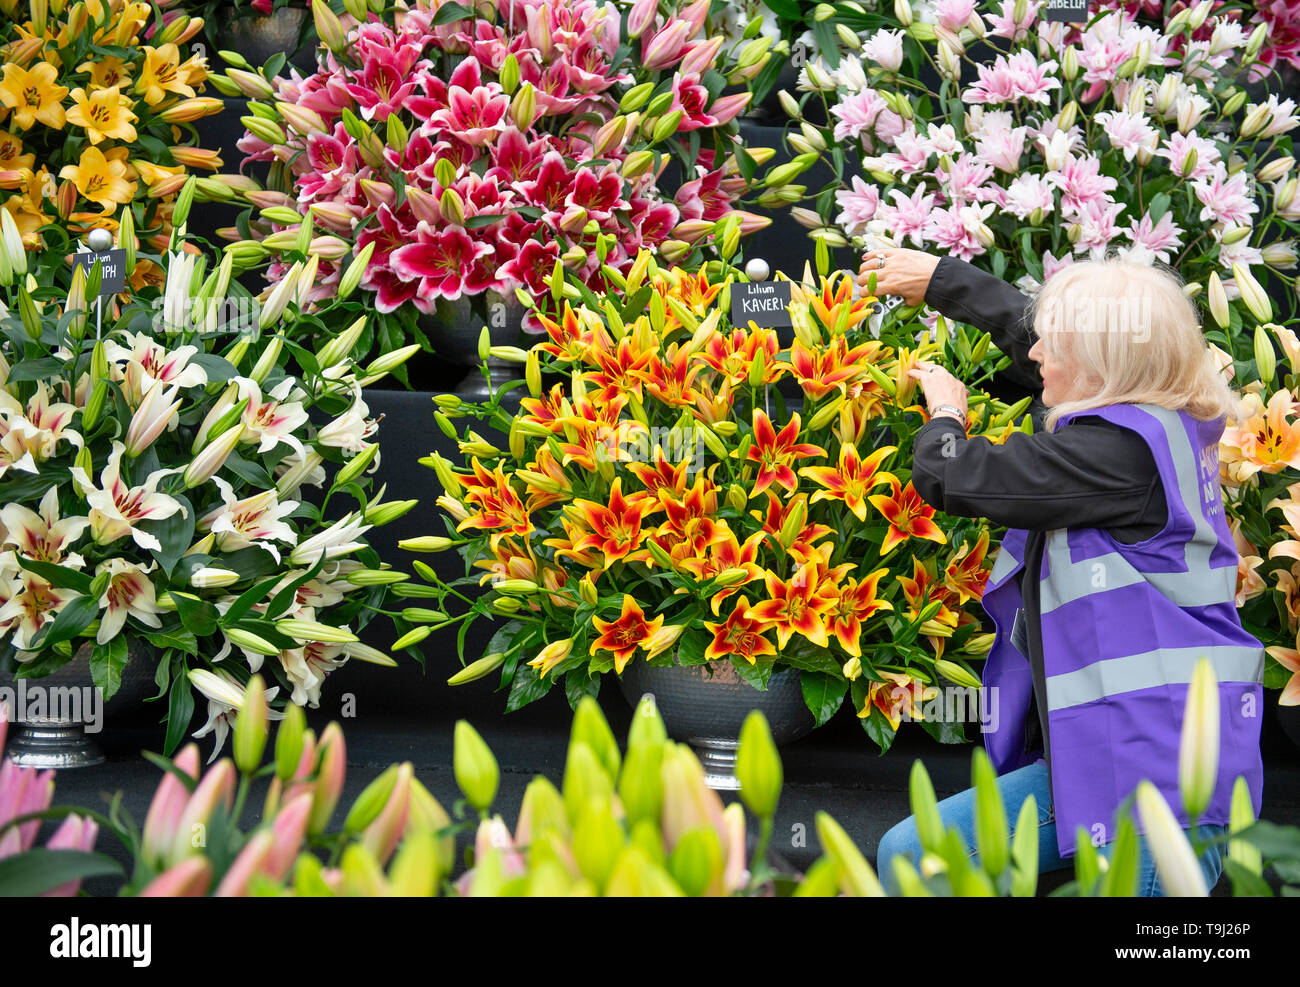 Royal Hospital Chelsea, London, UK. 19th May 2019. Chelsea Flower Show 2019 readies itself for judges with public opening on 21st May, finishing touches to exotic and colourful plant displays in the Great Pavilion. Credit: Malcolm Park/Alamy Live News. Stock Photo